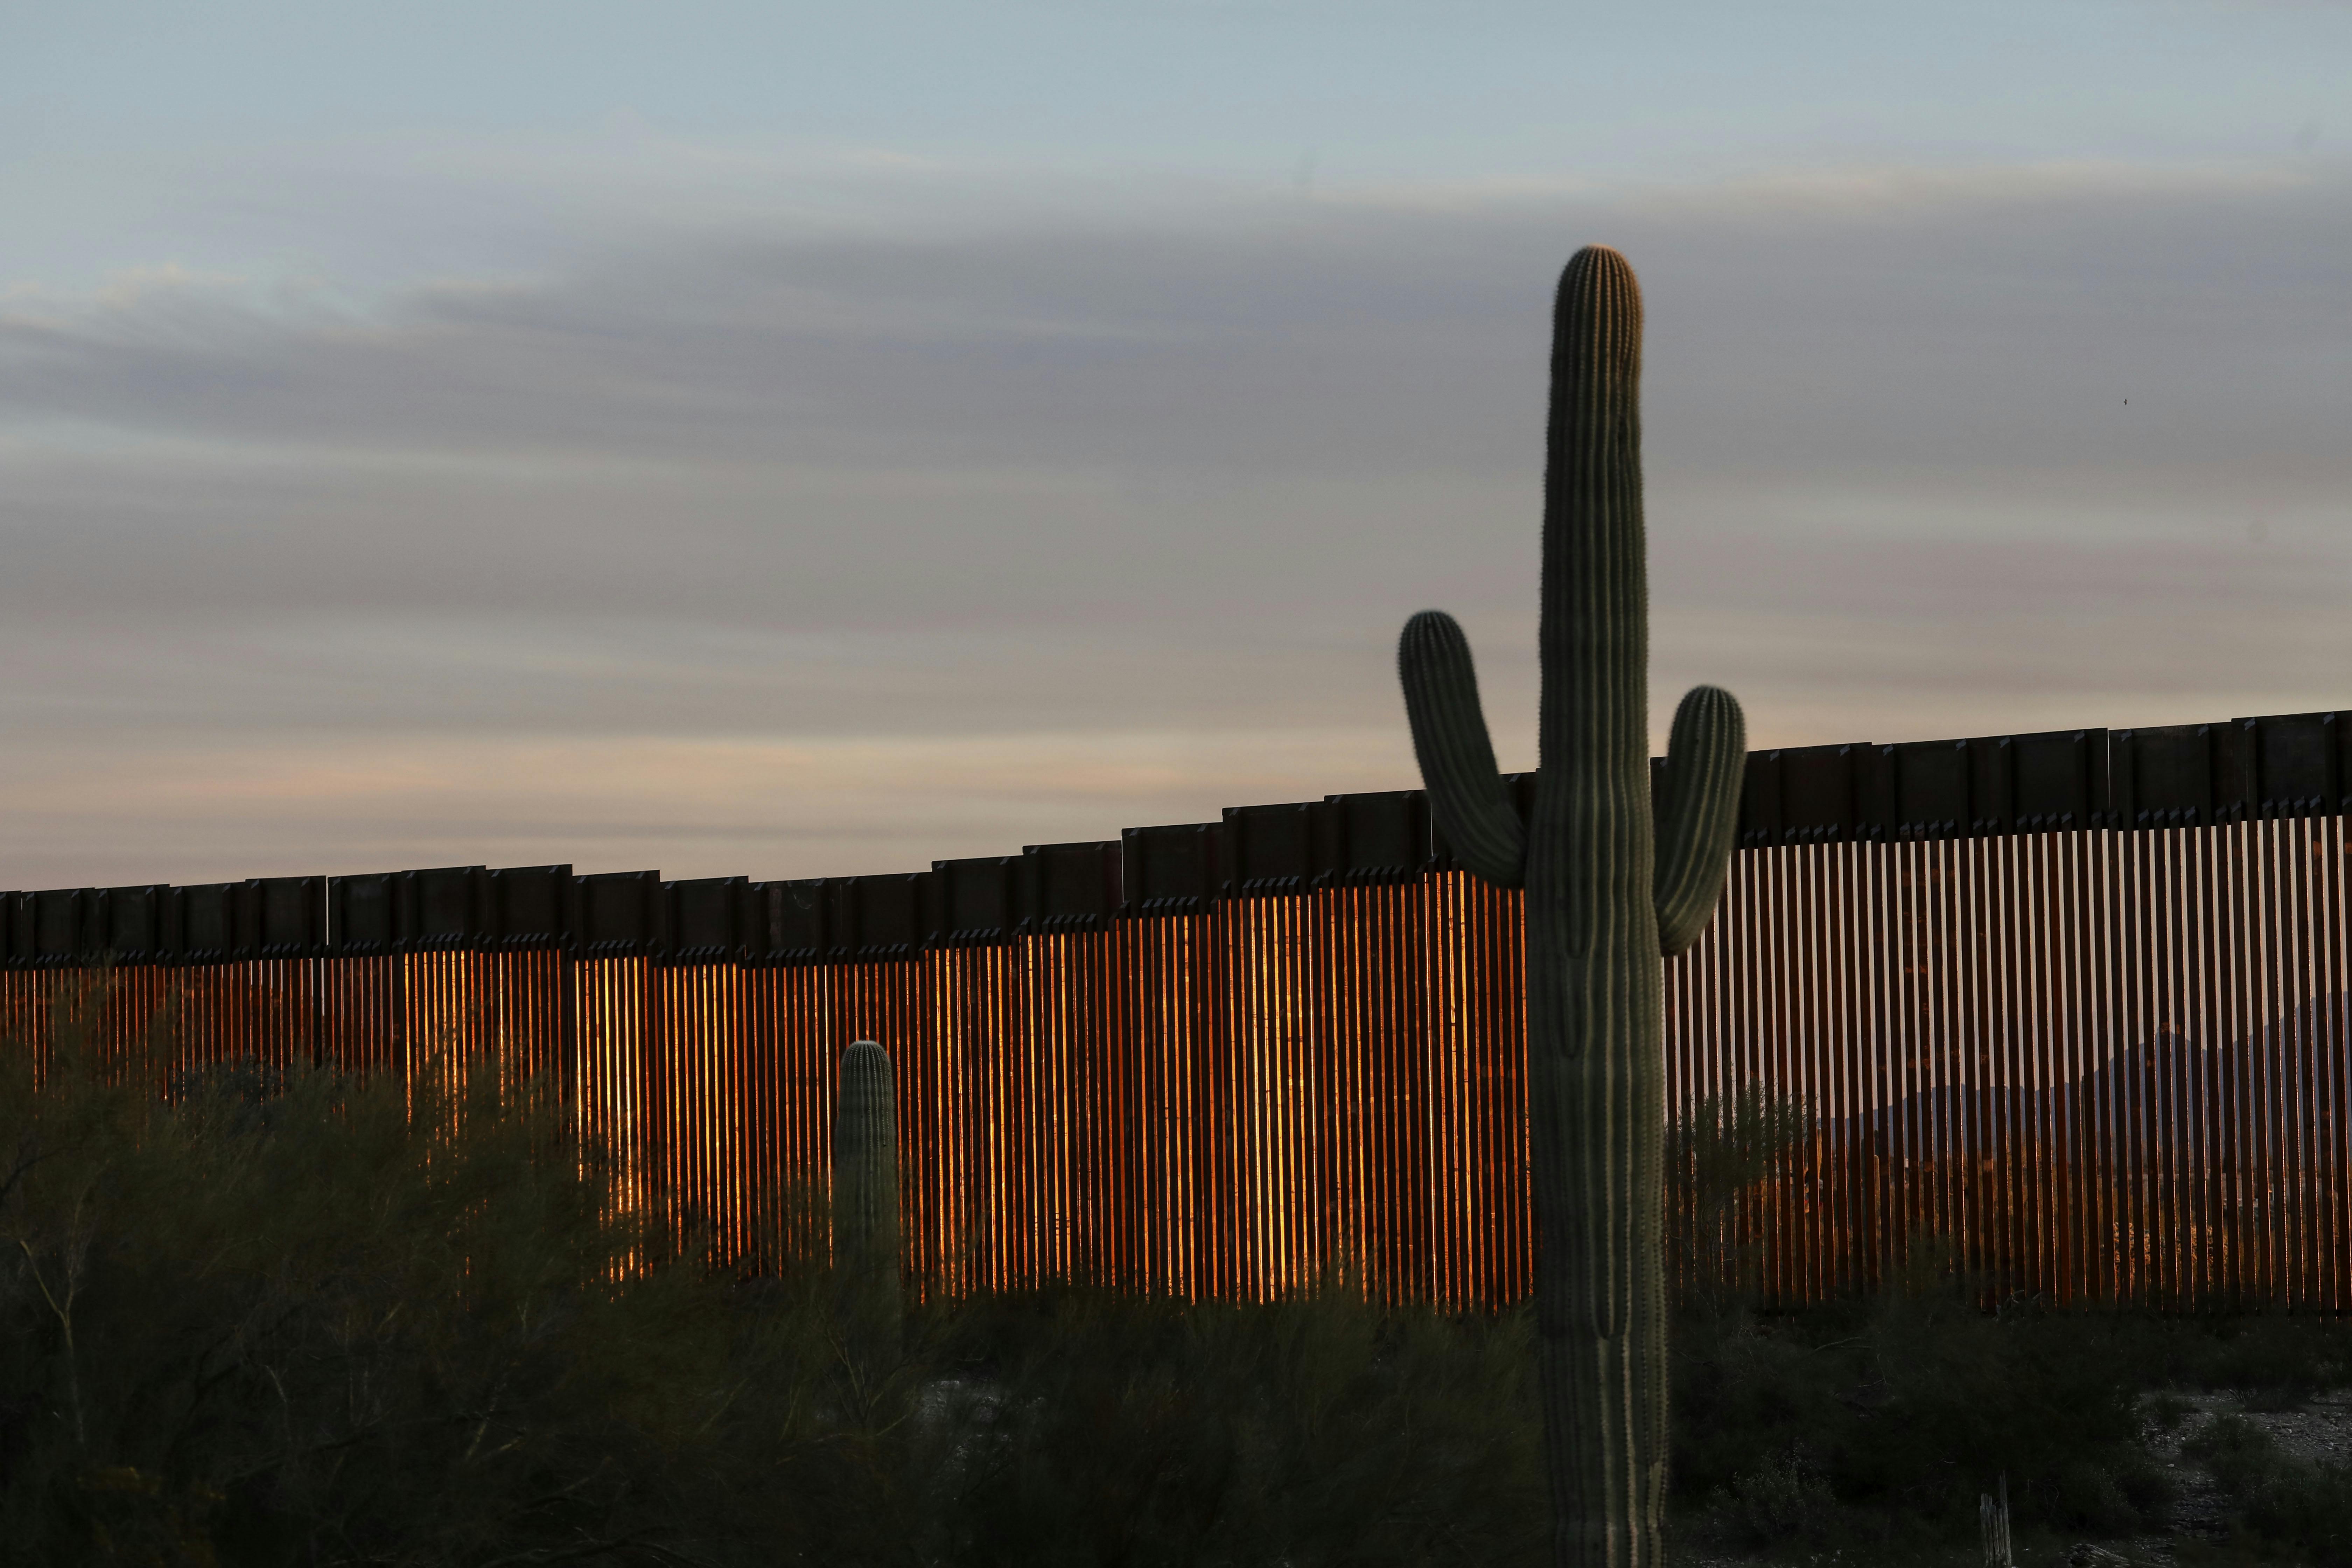 U.S. will remediate lands damaged by border wall